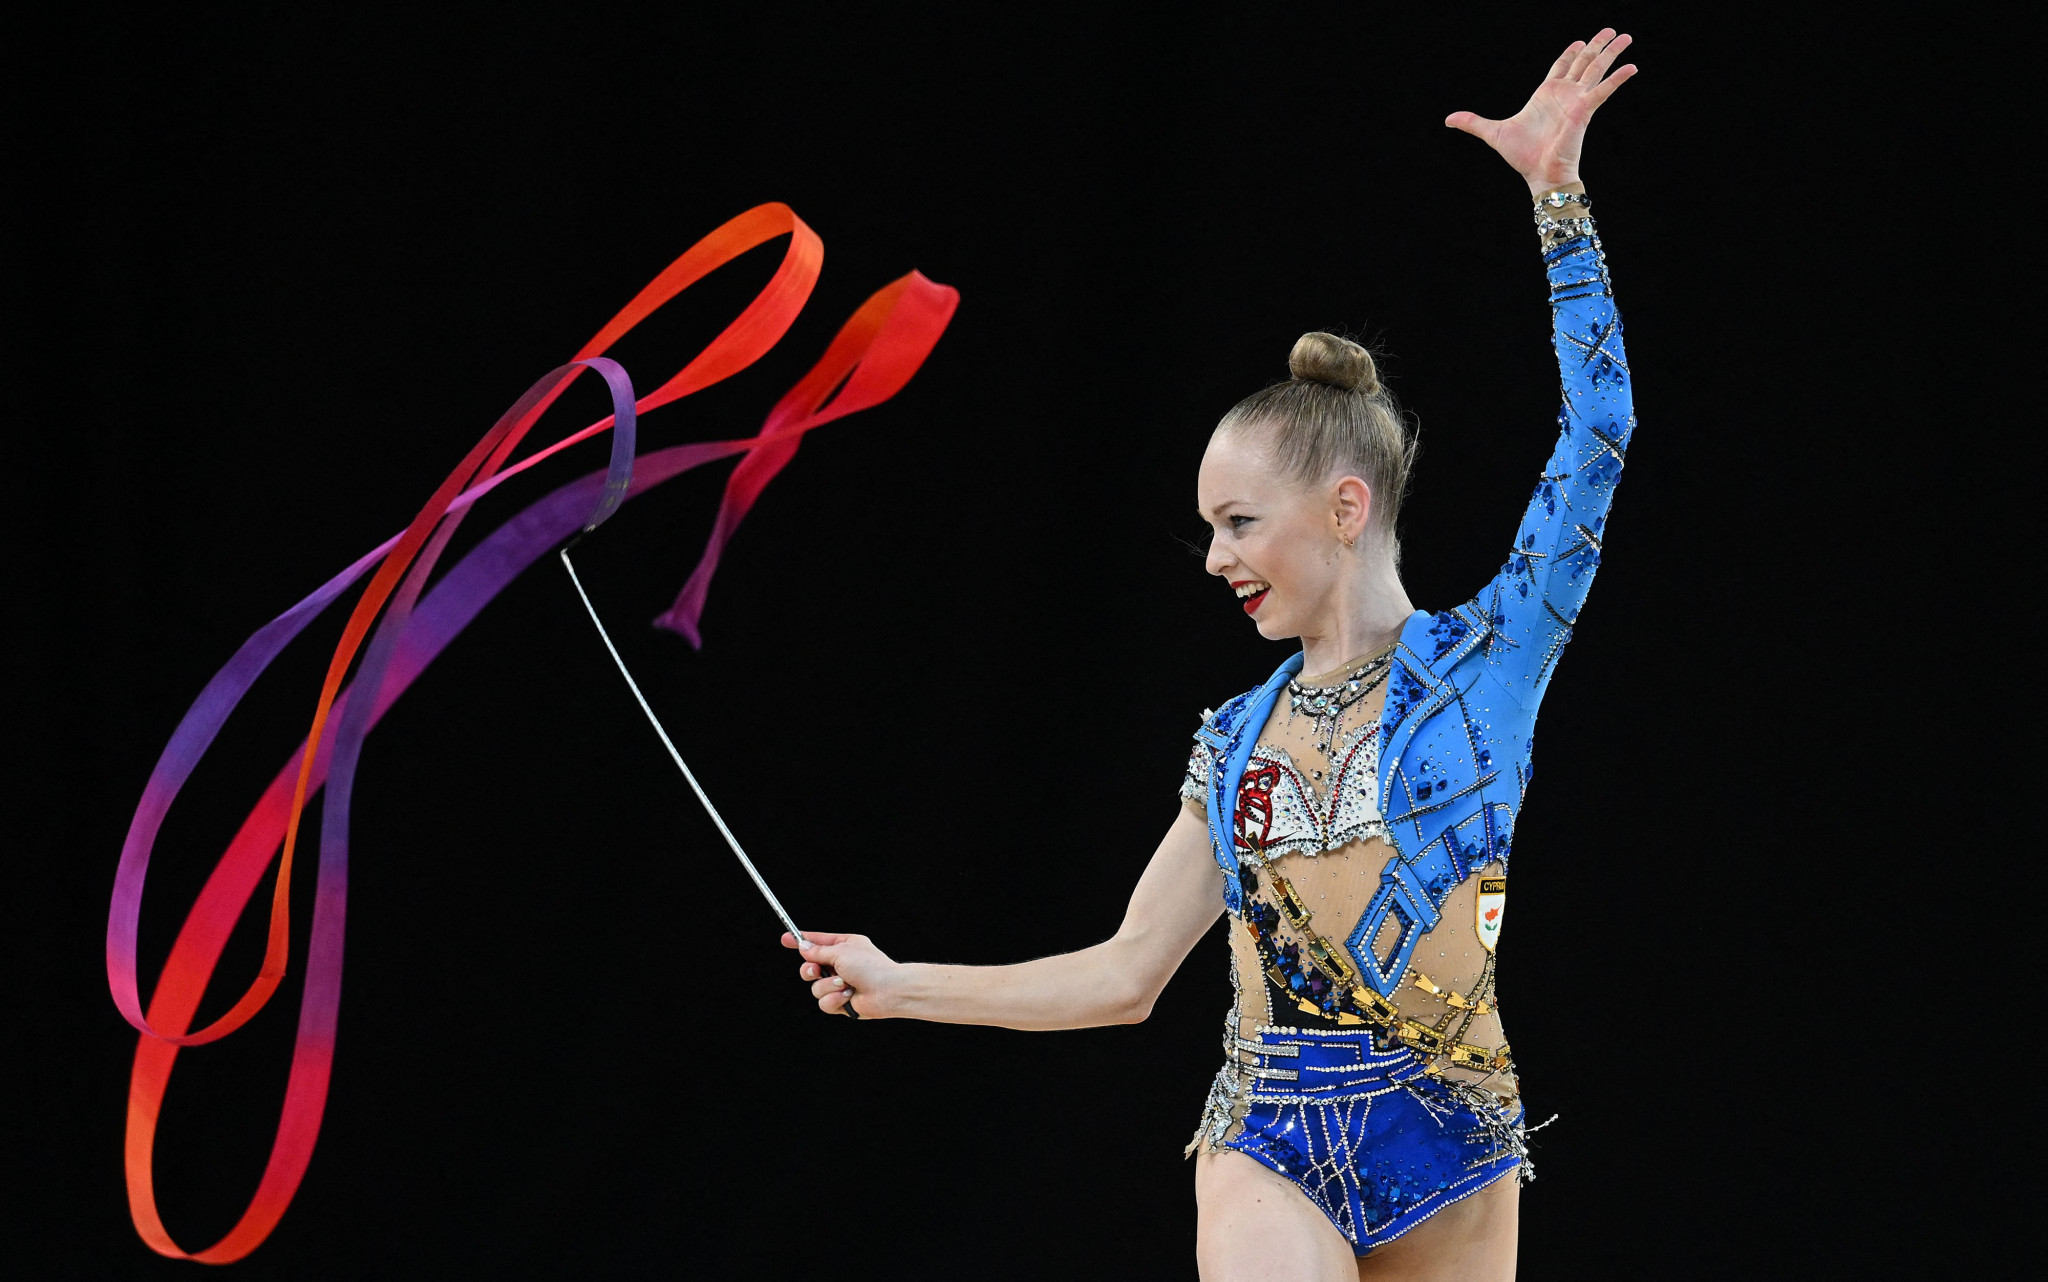 Tomorrow is day one of the Rhythmic Gymnastics World Championships ©Getty Images